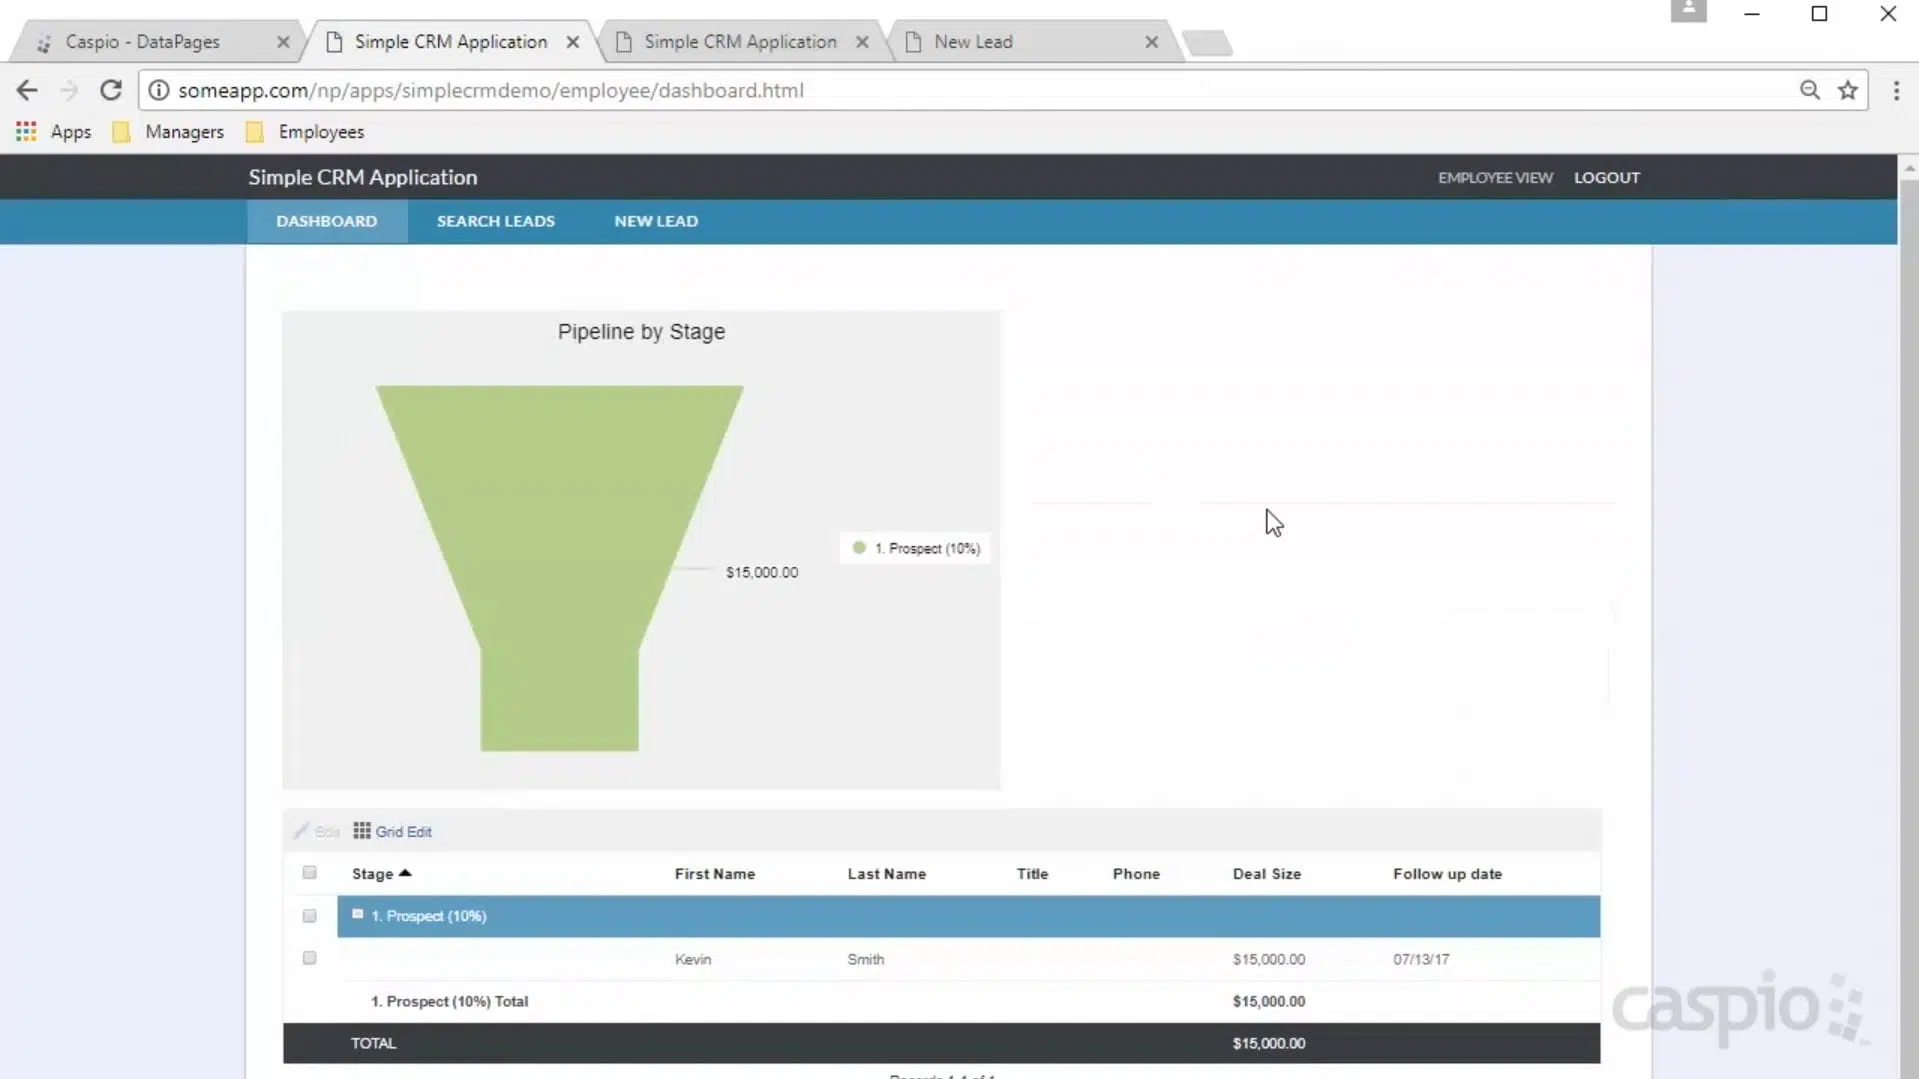 Screenshot of a sample CRM application designed on Caspio. It shows a “Dashboard” interface, featuring a graph and tables.